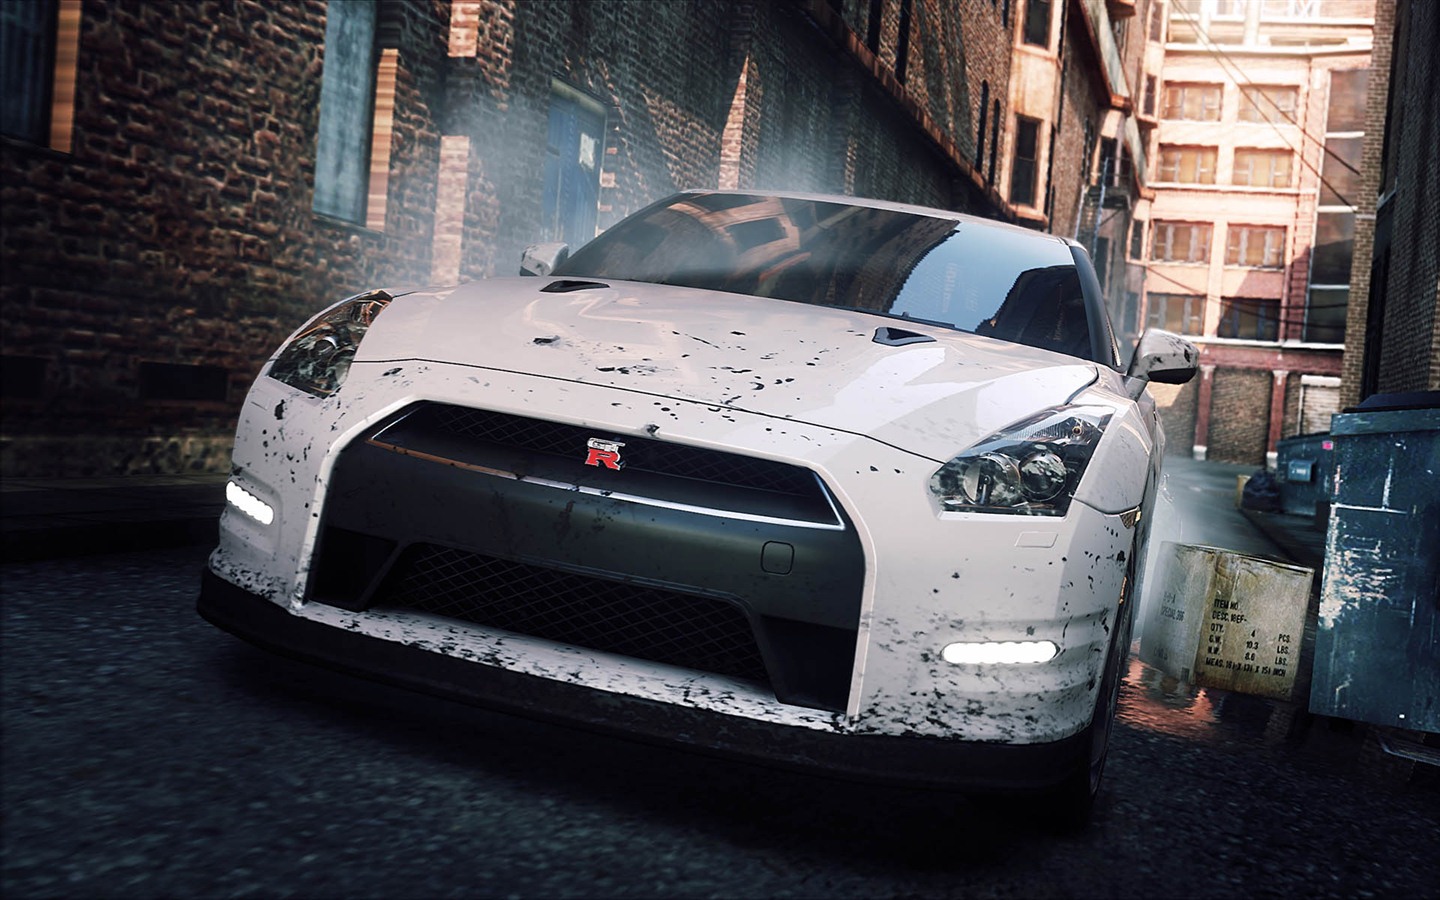 Need for Speed: Most Wanted 极品飞车17：最高通缉 高清壁纸9 - 1440x900